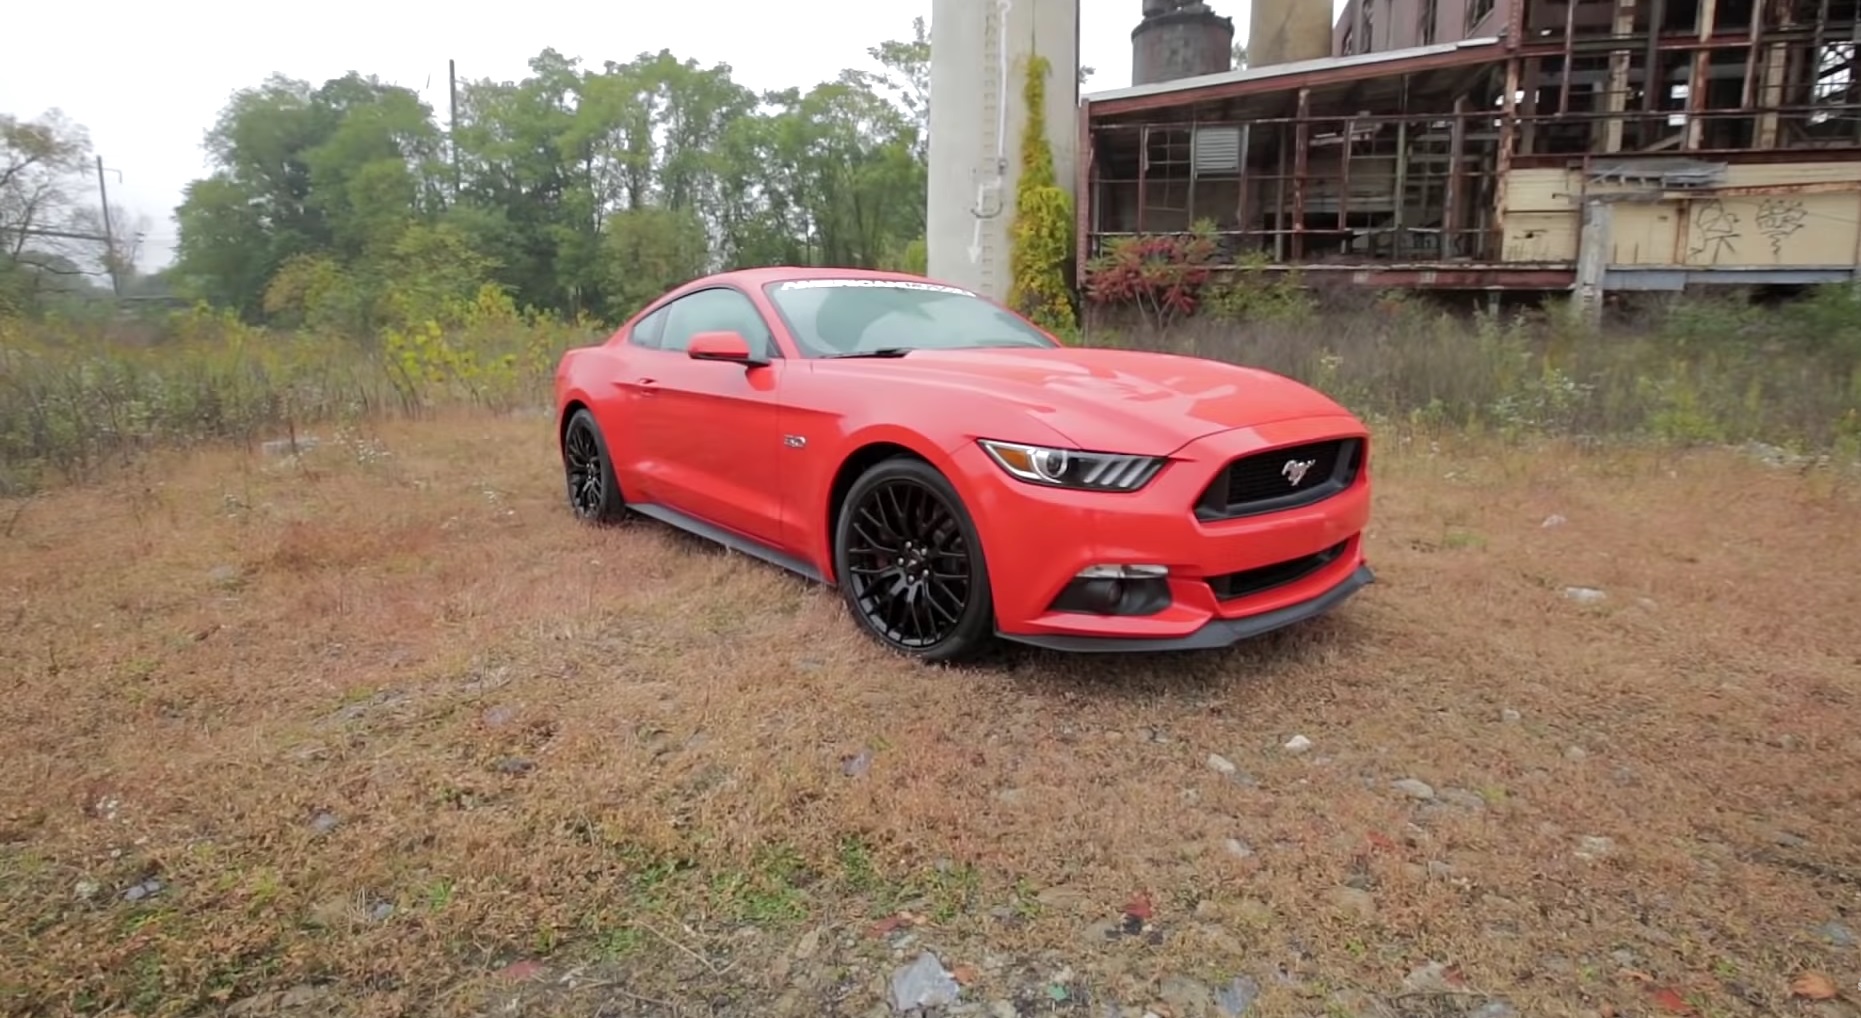 Video: 2015 Ford Mustang GT Official Review